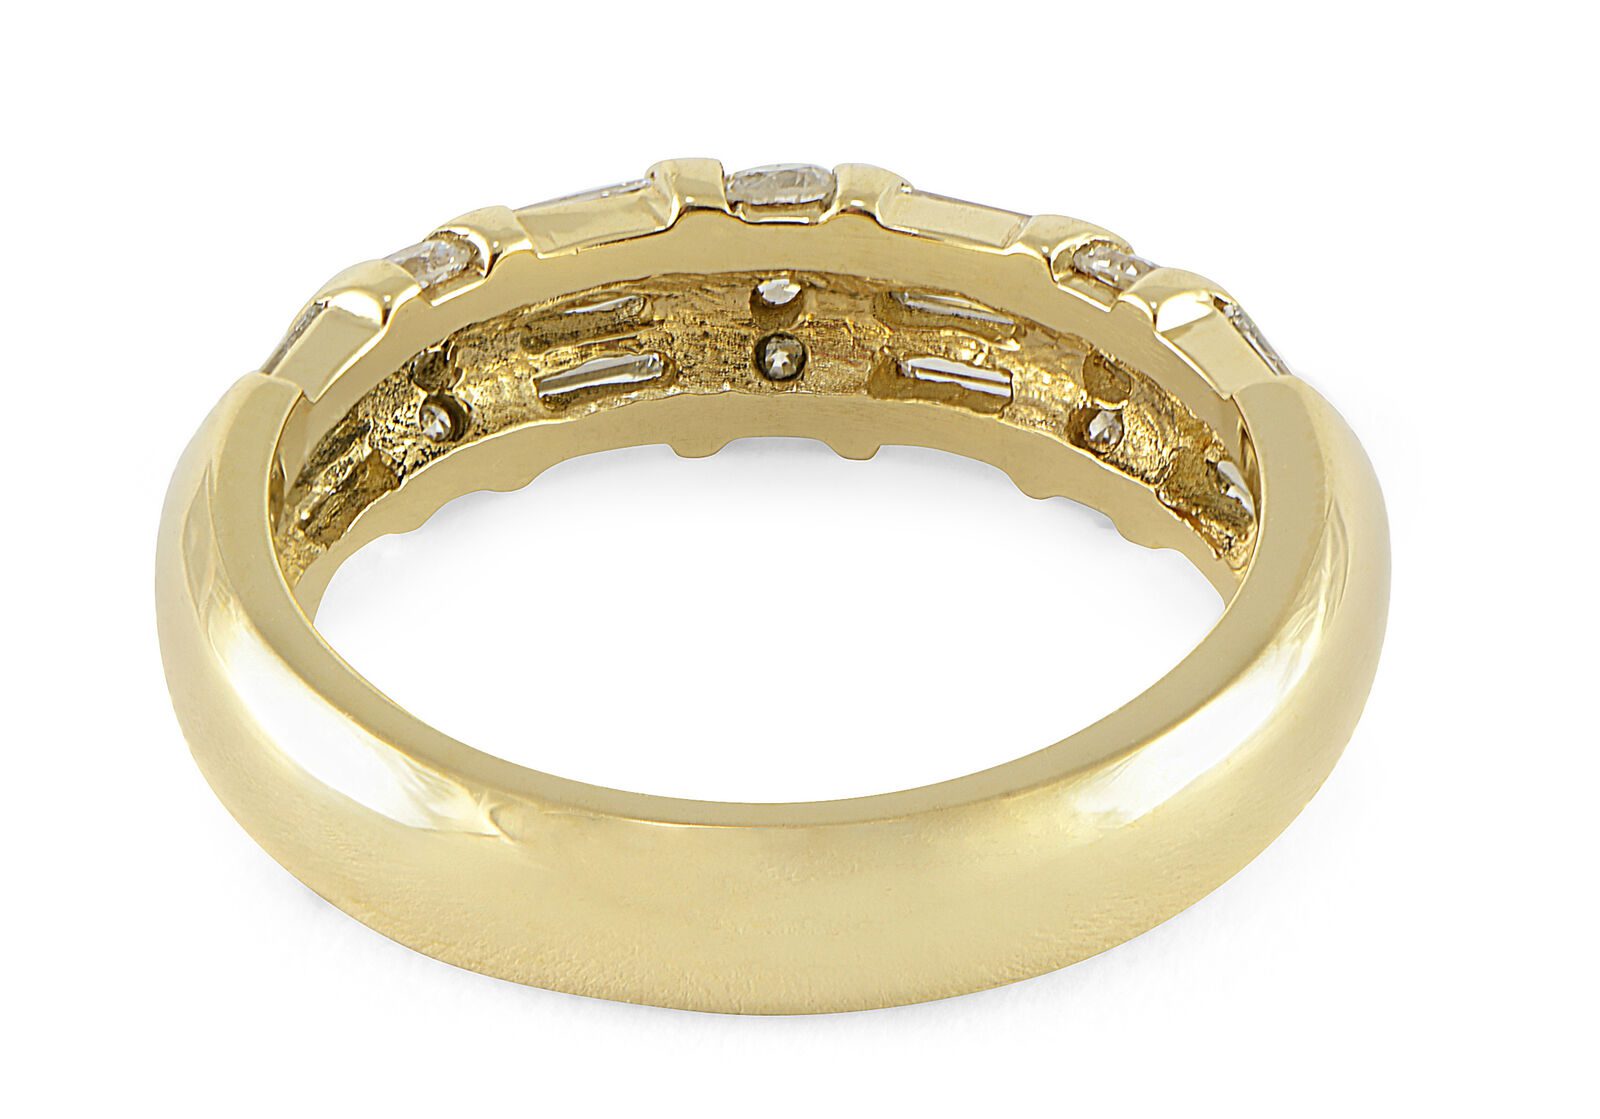 Round/Baguette Channel Wedding Band 14k Yellow Gold 1.0ct